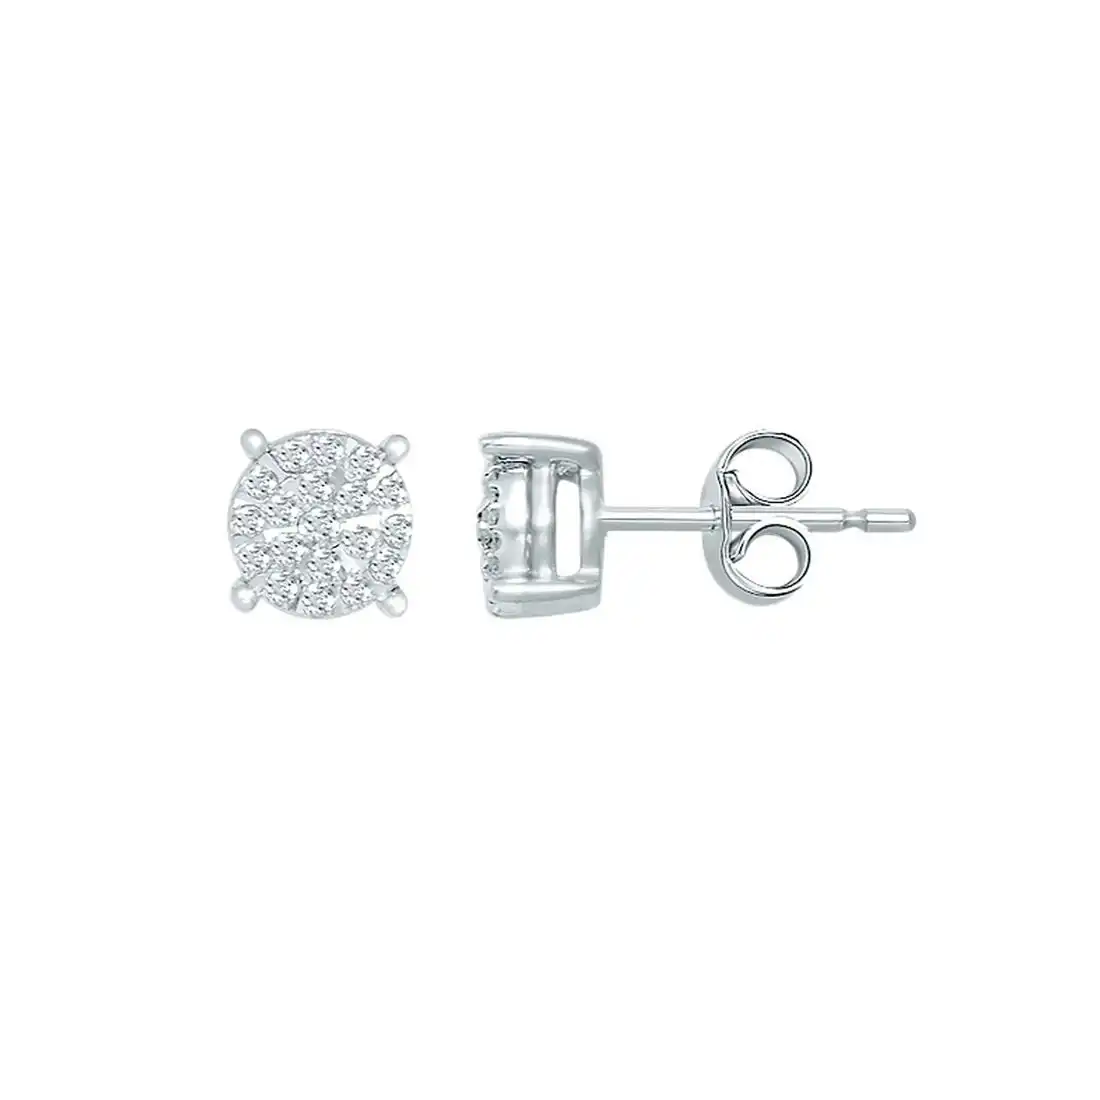 Earrings with 0.15ct of Diamonds in 9ct White Gold